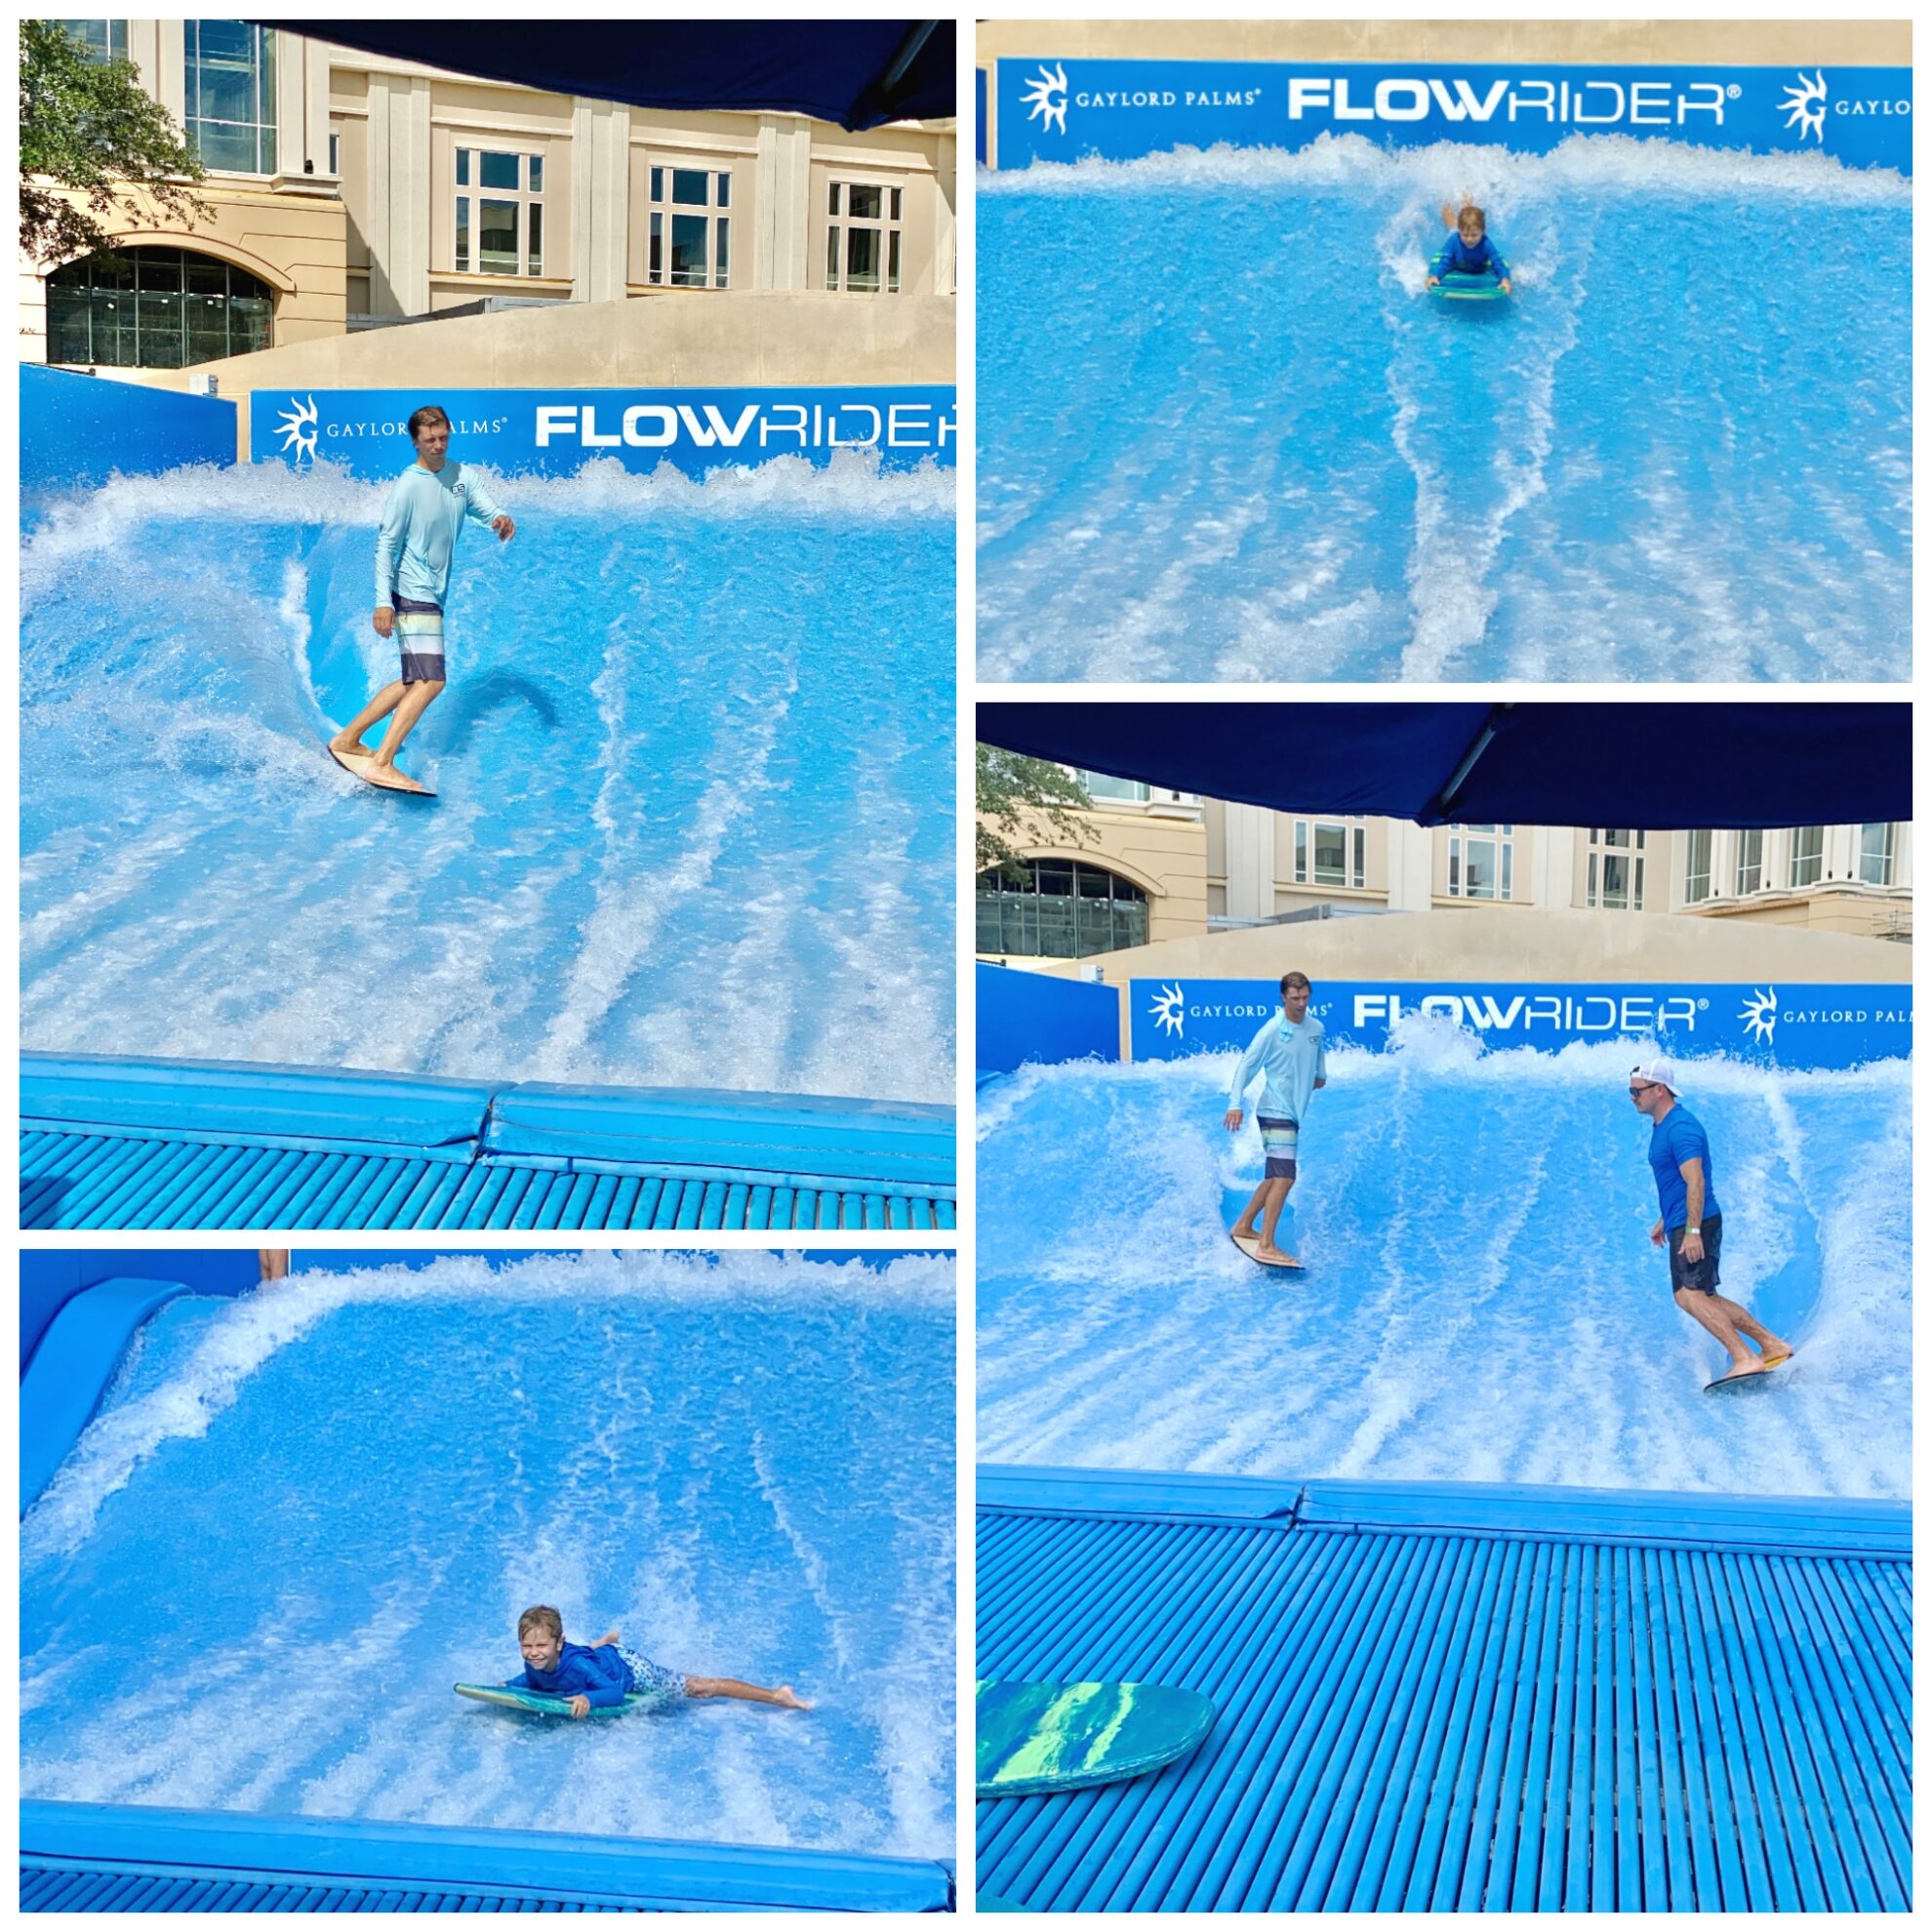 Four photo split of two men surfing on FlowRider and a little boy body boarding.